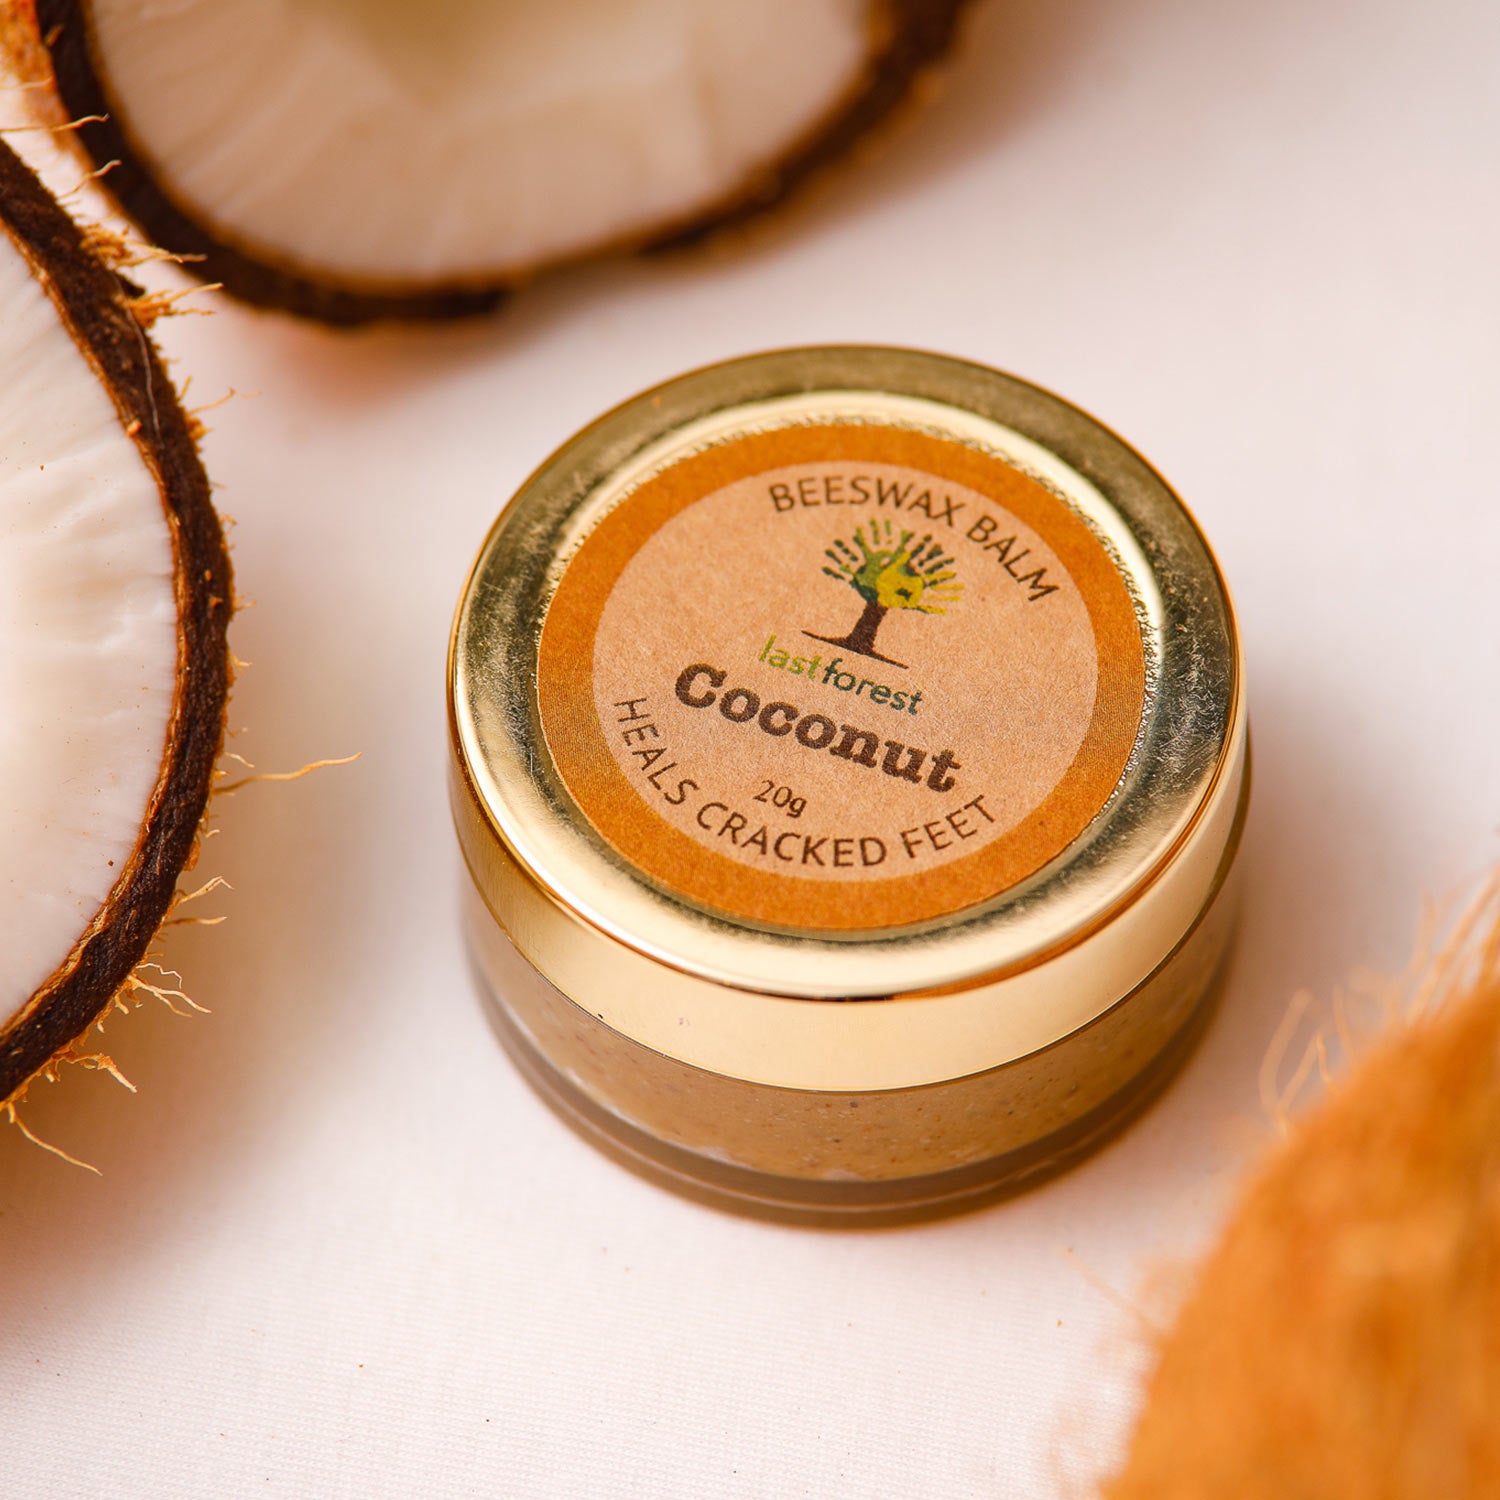 Last Forest Coconut Balm for Cracked Heels 20g